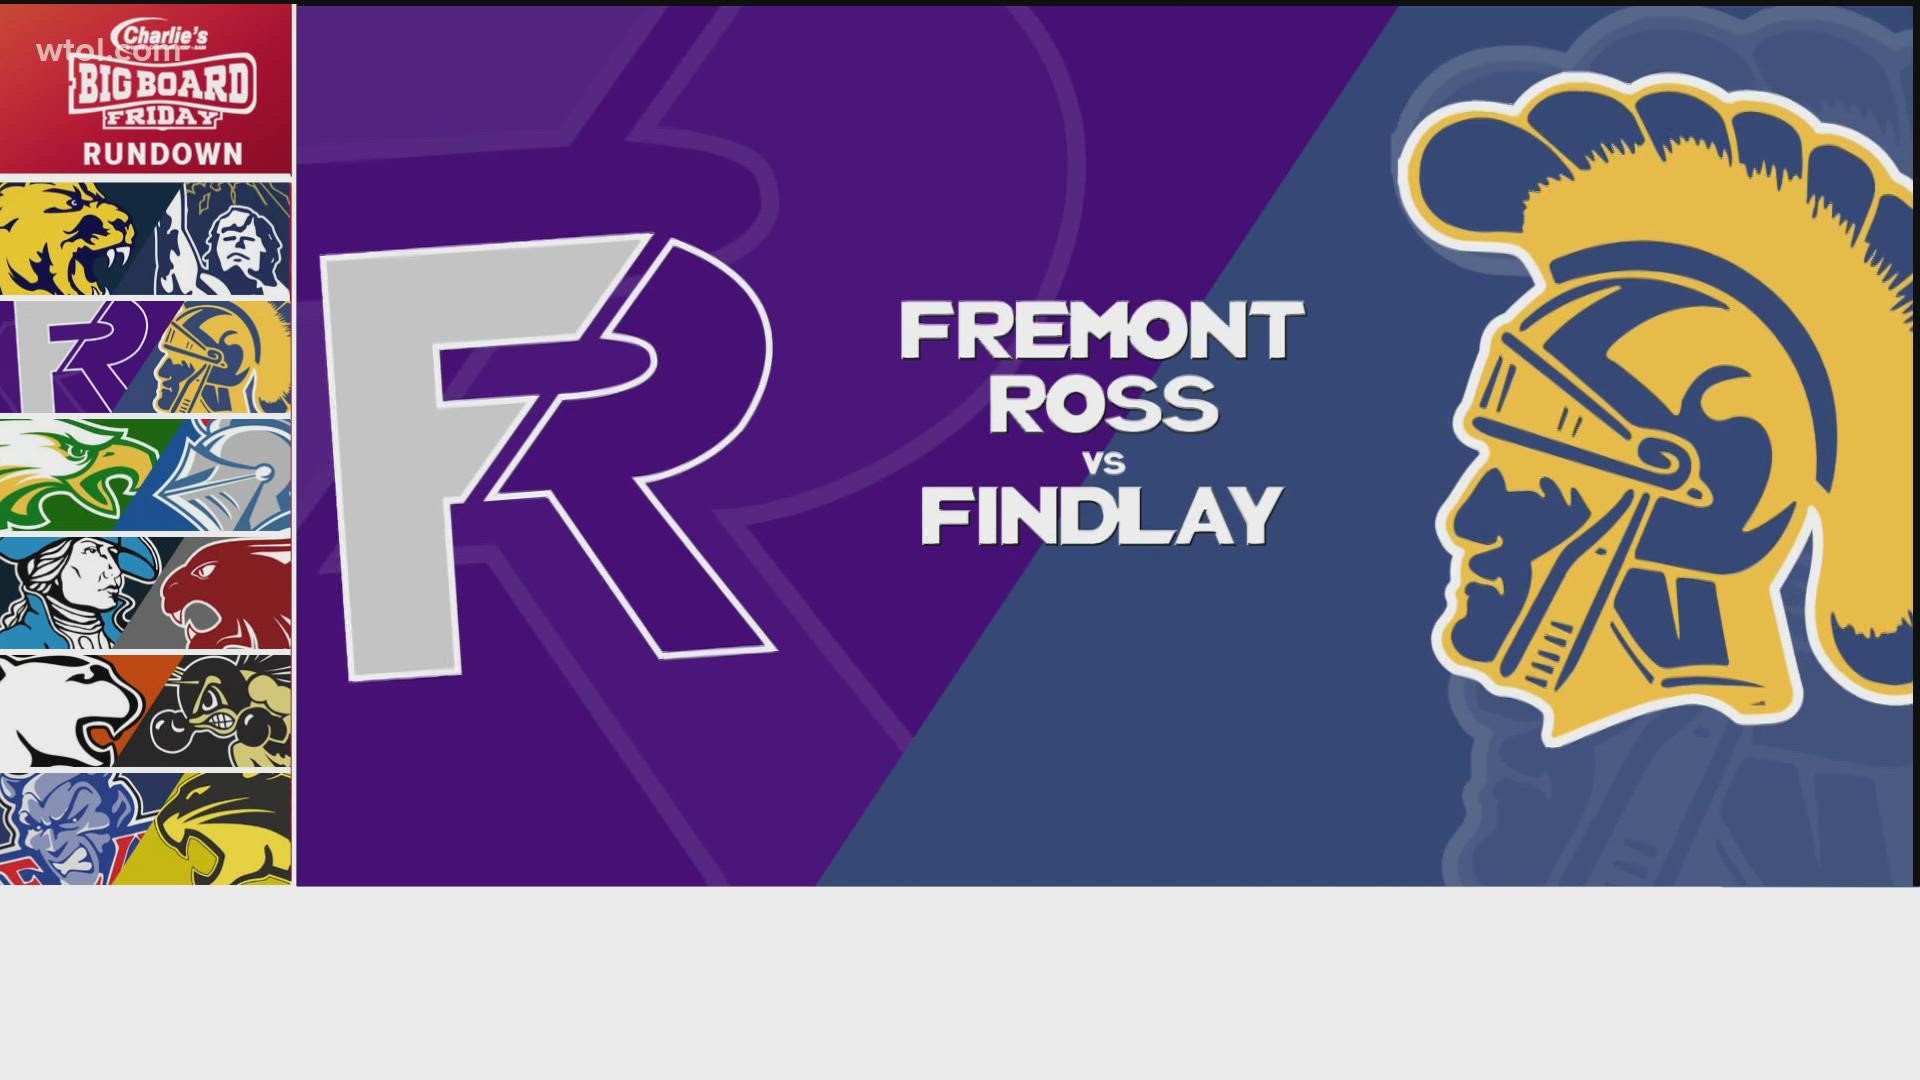 Fremont Ross was dealt their first loss of the season on the road in Findlay.